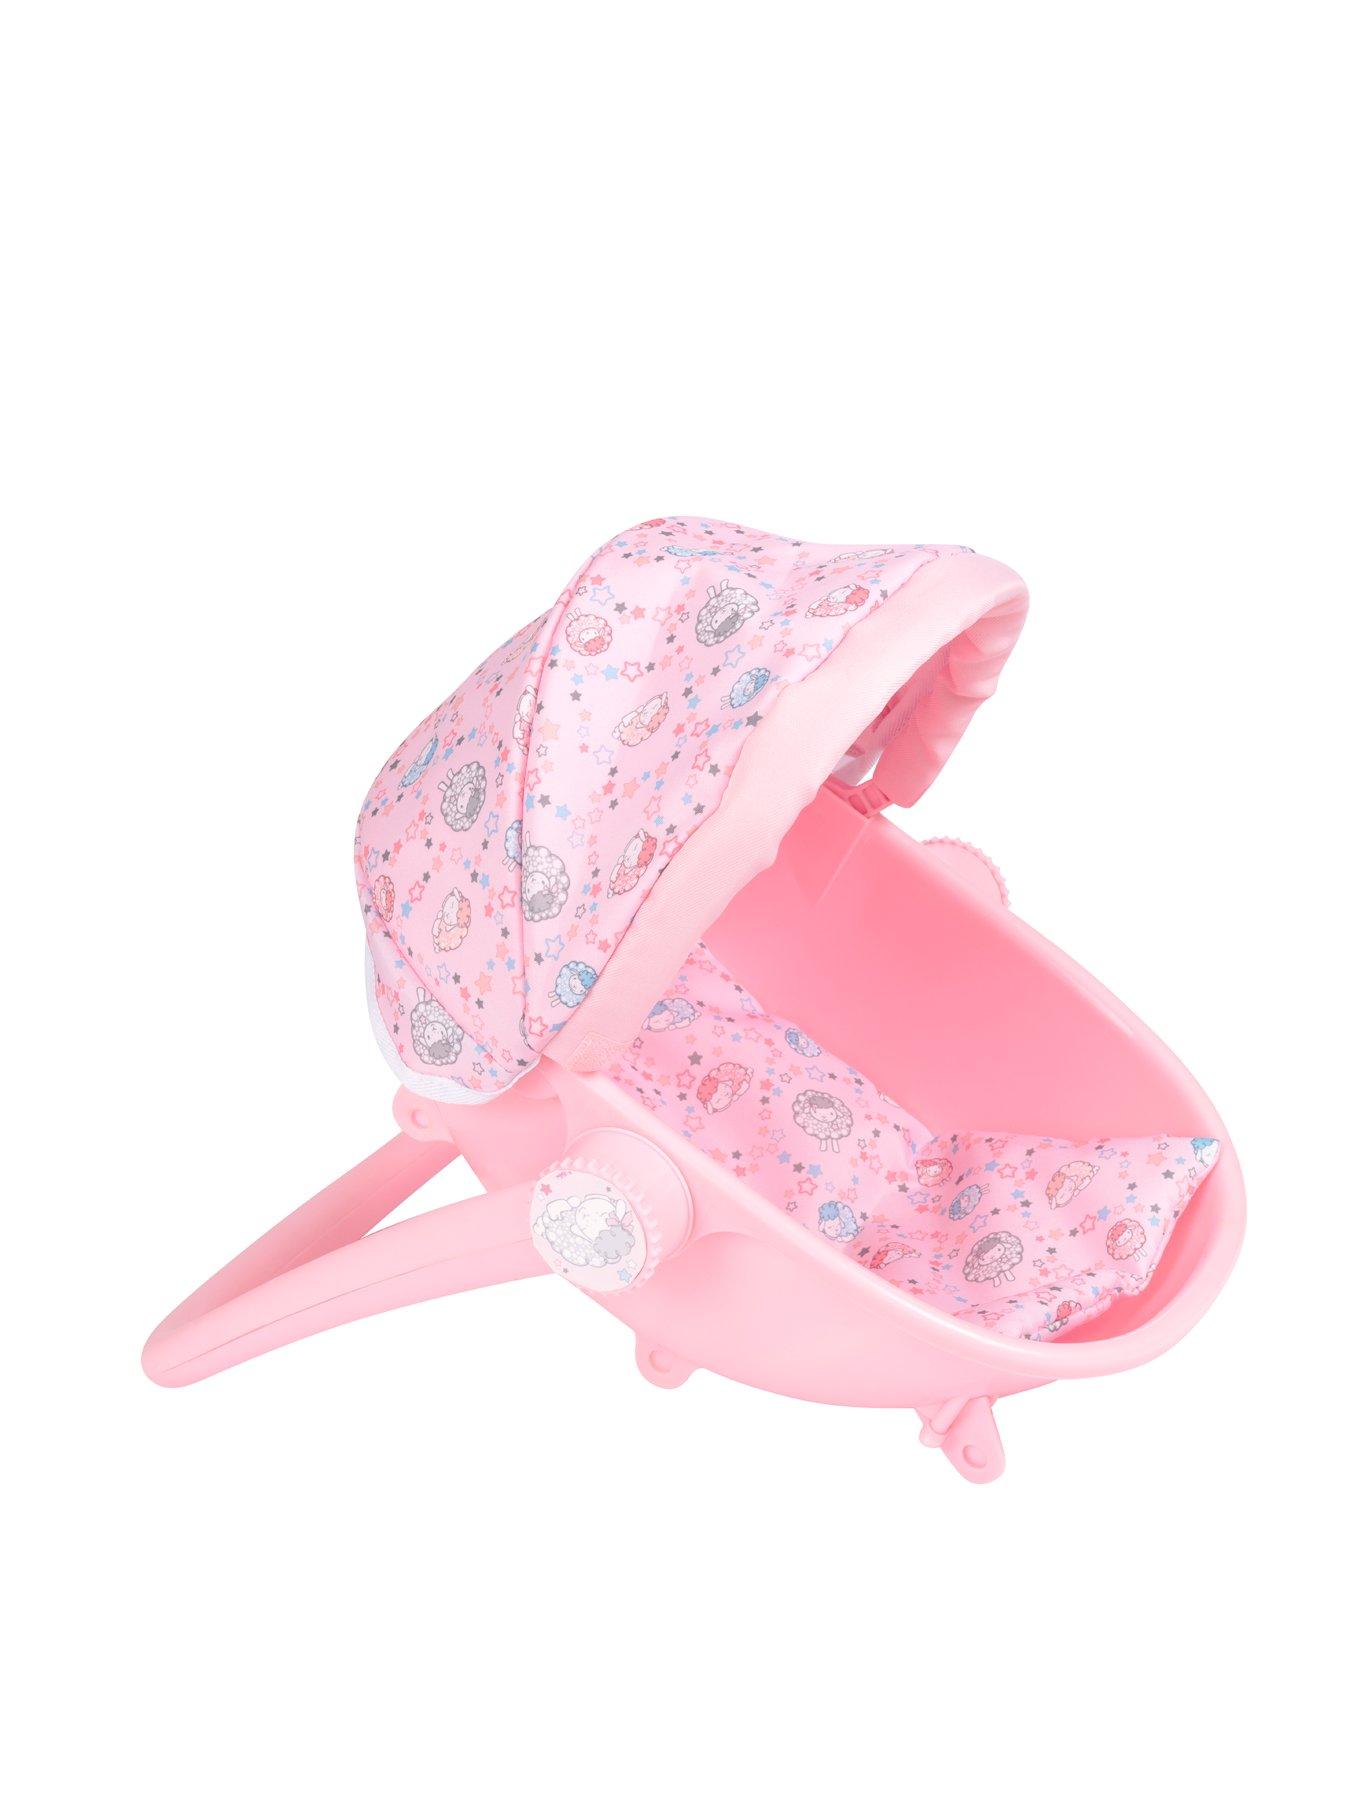 Doll Stroller Amazon.com Zapf Creation Baby Transport, doll, miscellaneous,  infant, baby Products png | Klipartz